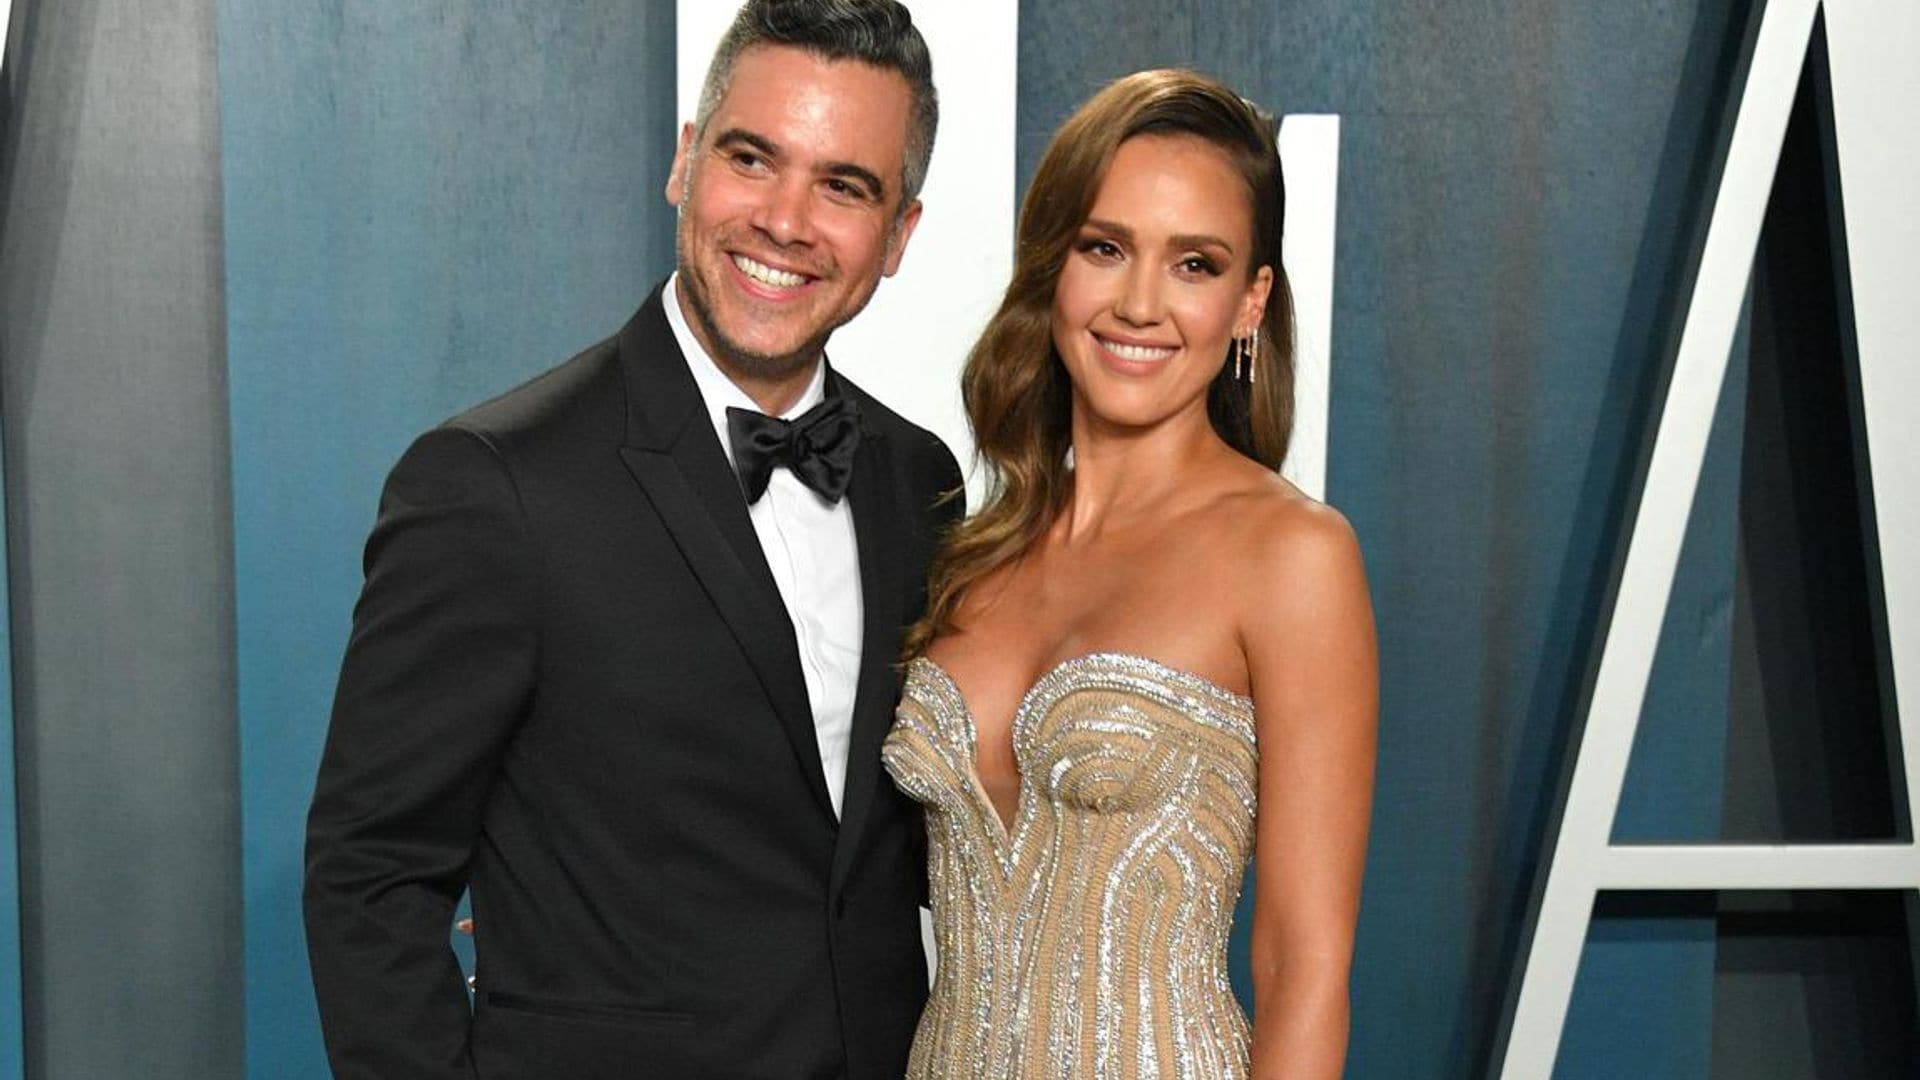 Jessica Alba reveals why she’s “had enough” of her family life in isolation